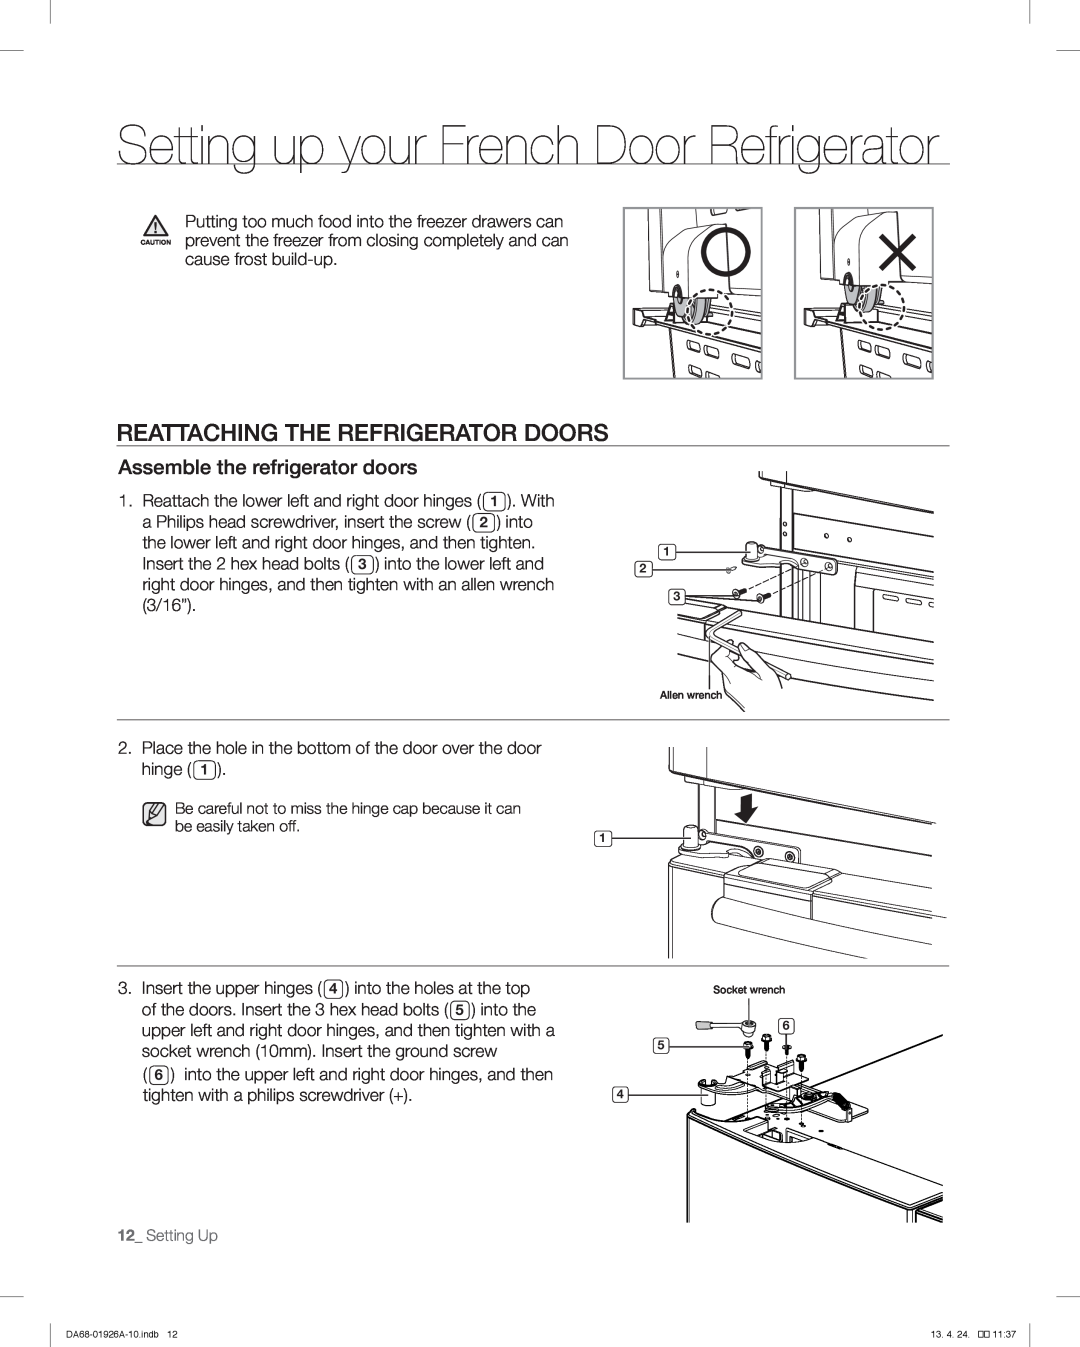 Samsung RFG293HARS, RFG293HAWP user manual Reattaching The Refrigerator Doors, Setting up your French Door Refrigerator 